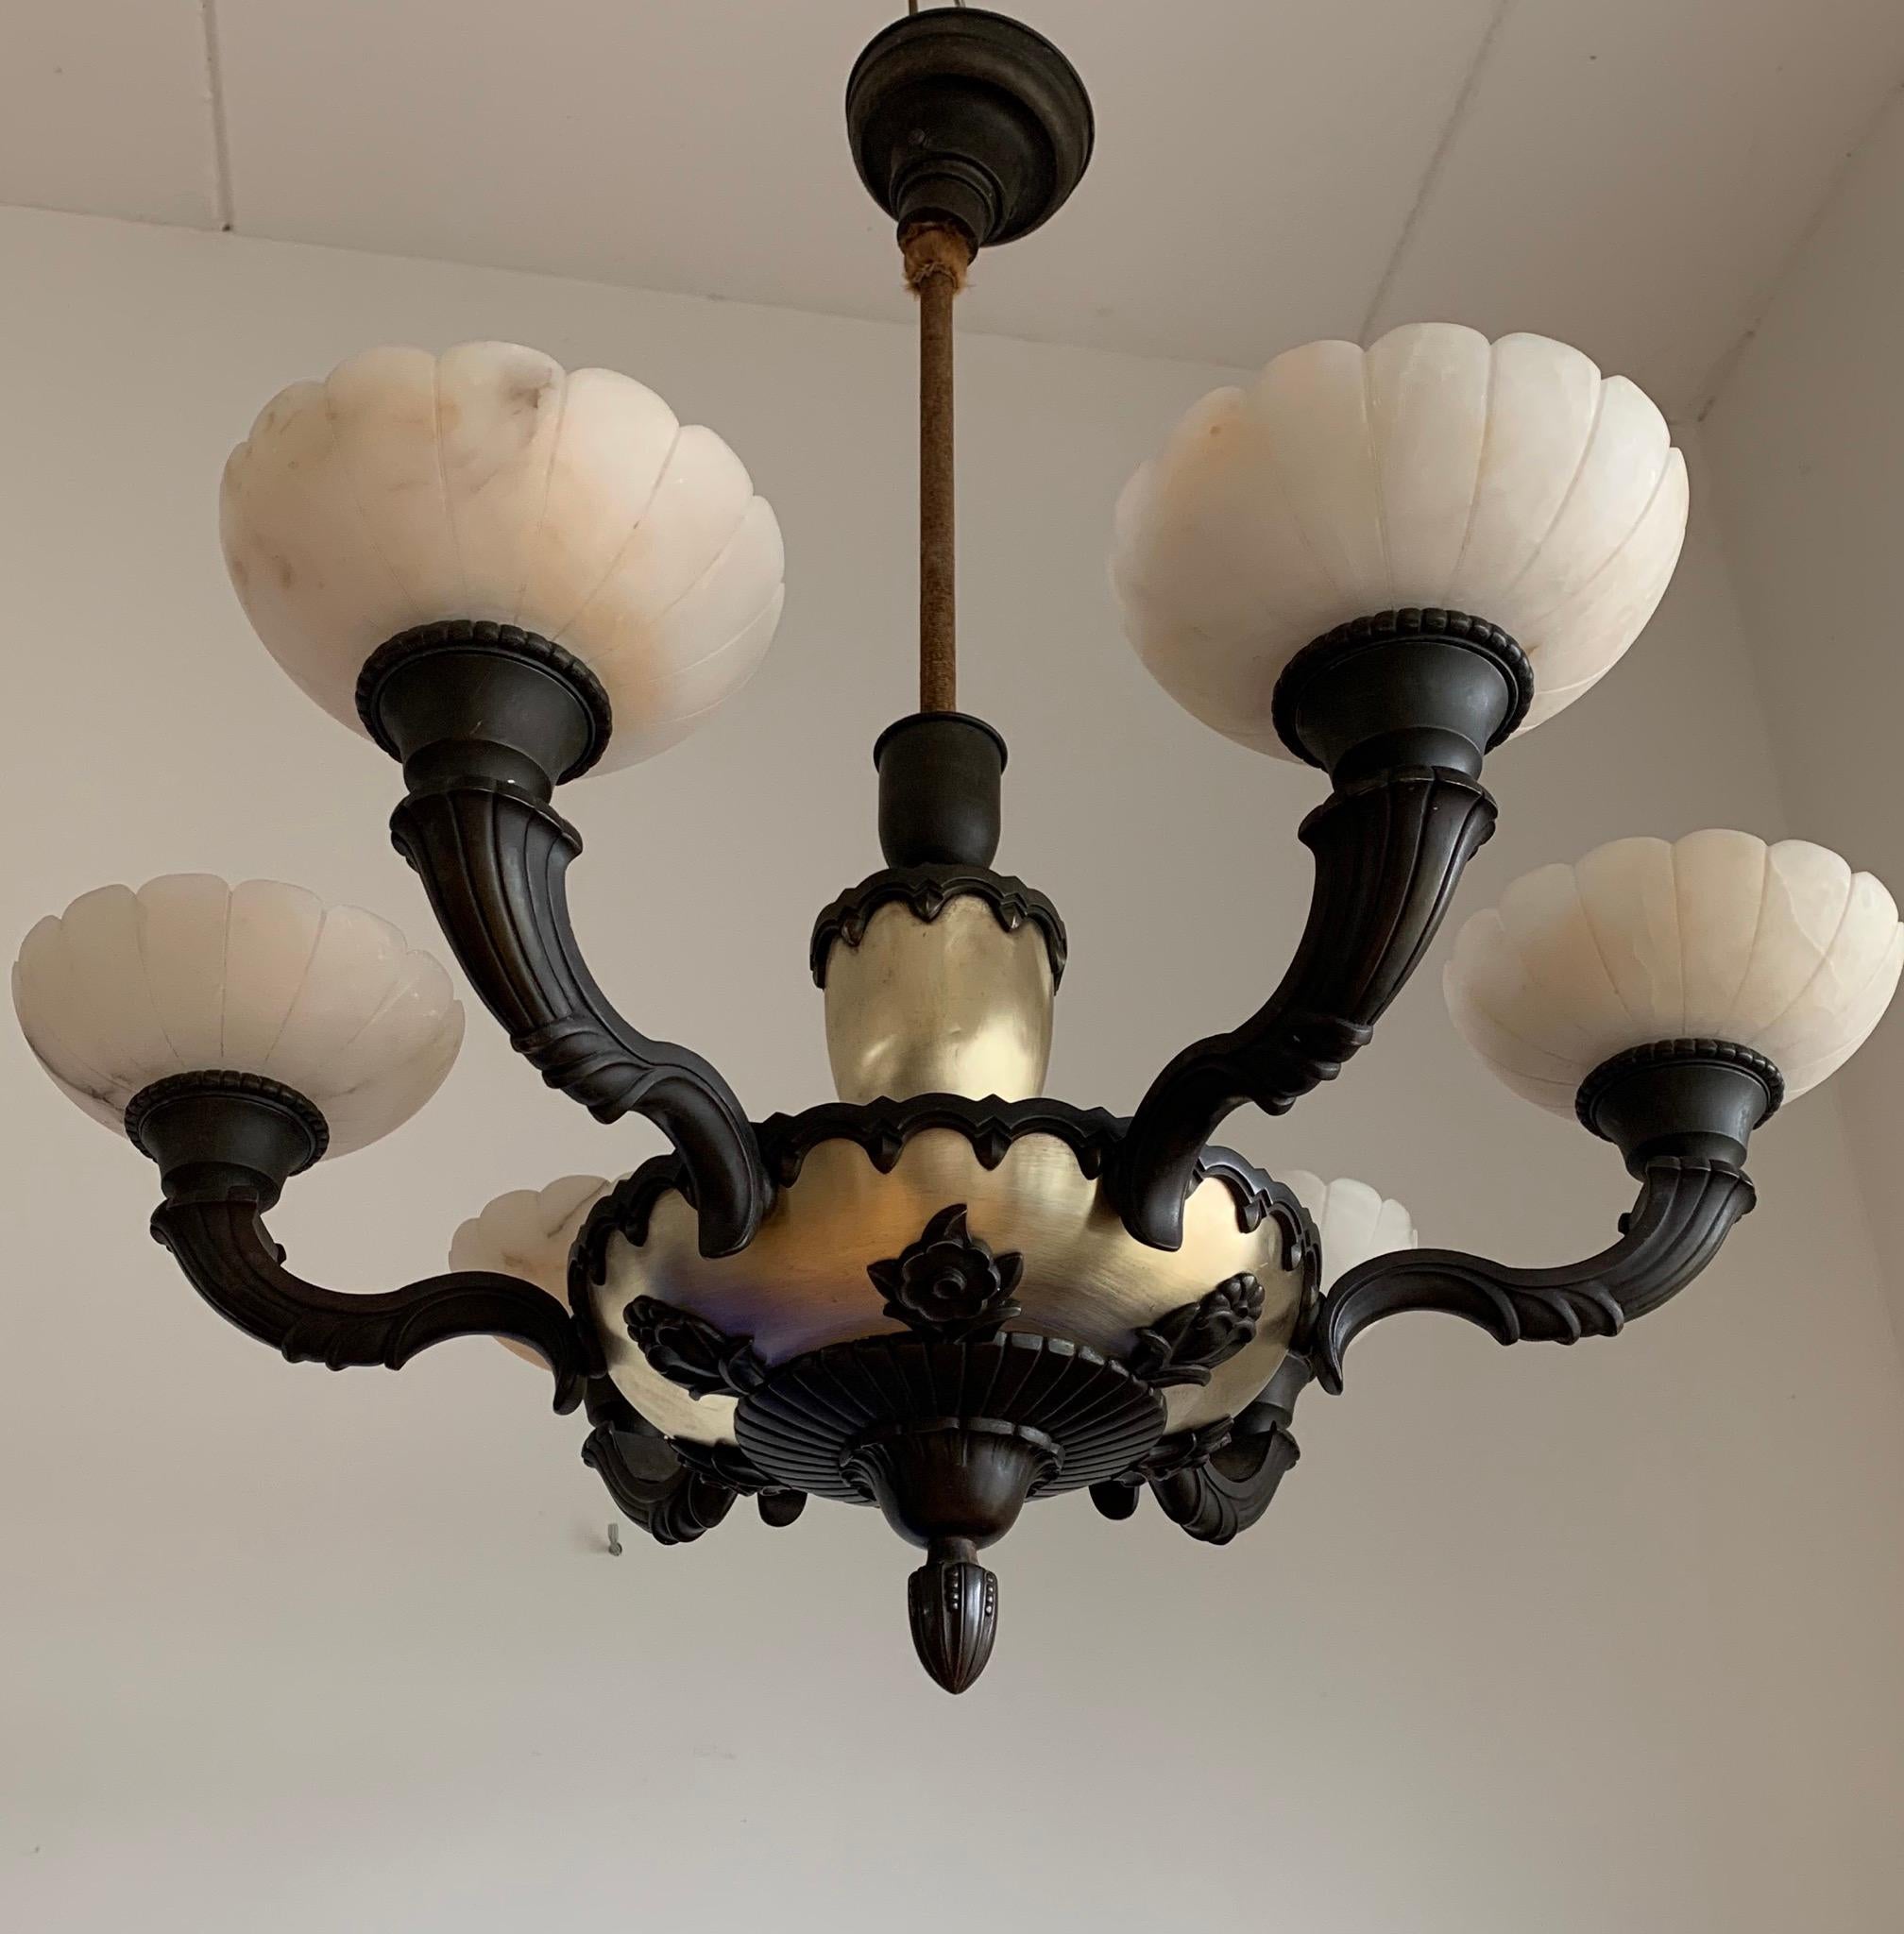 Stylish 1920s Art Deco White Alabaster and Bronze Arms Chandelier Light Fixture 1